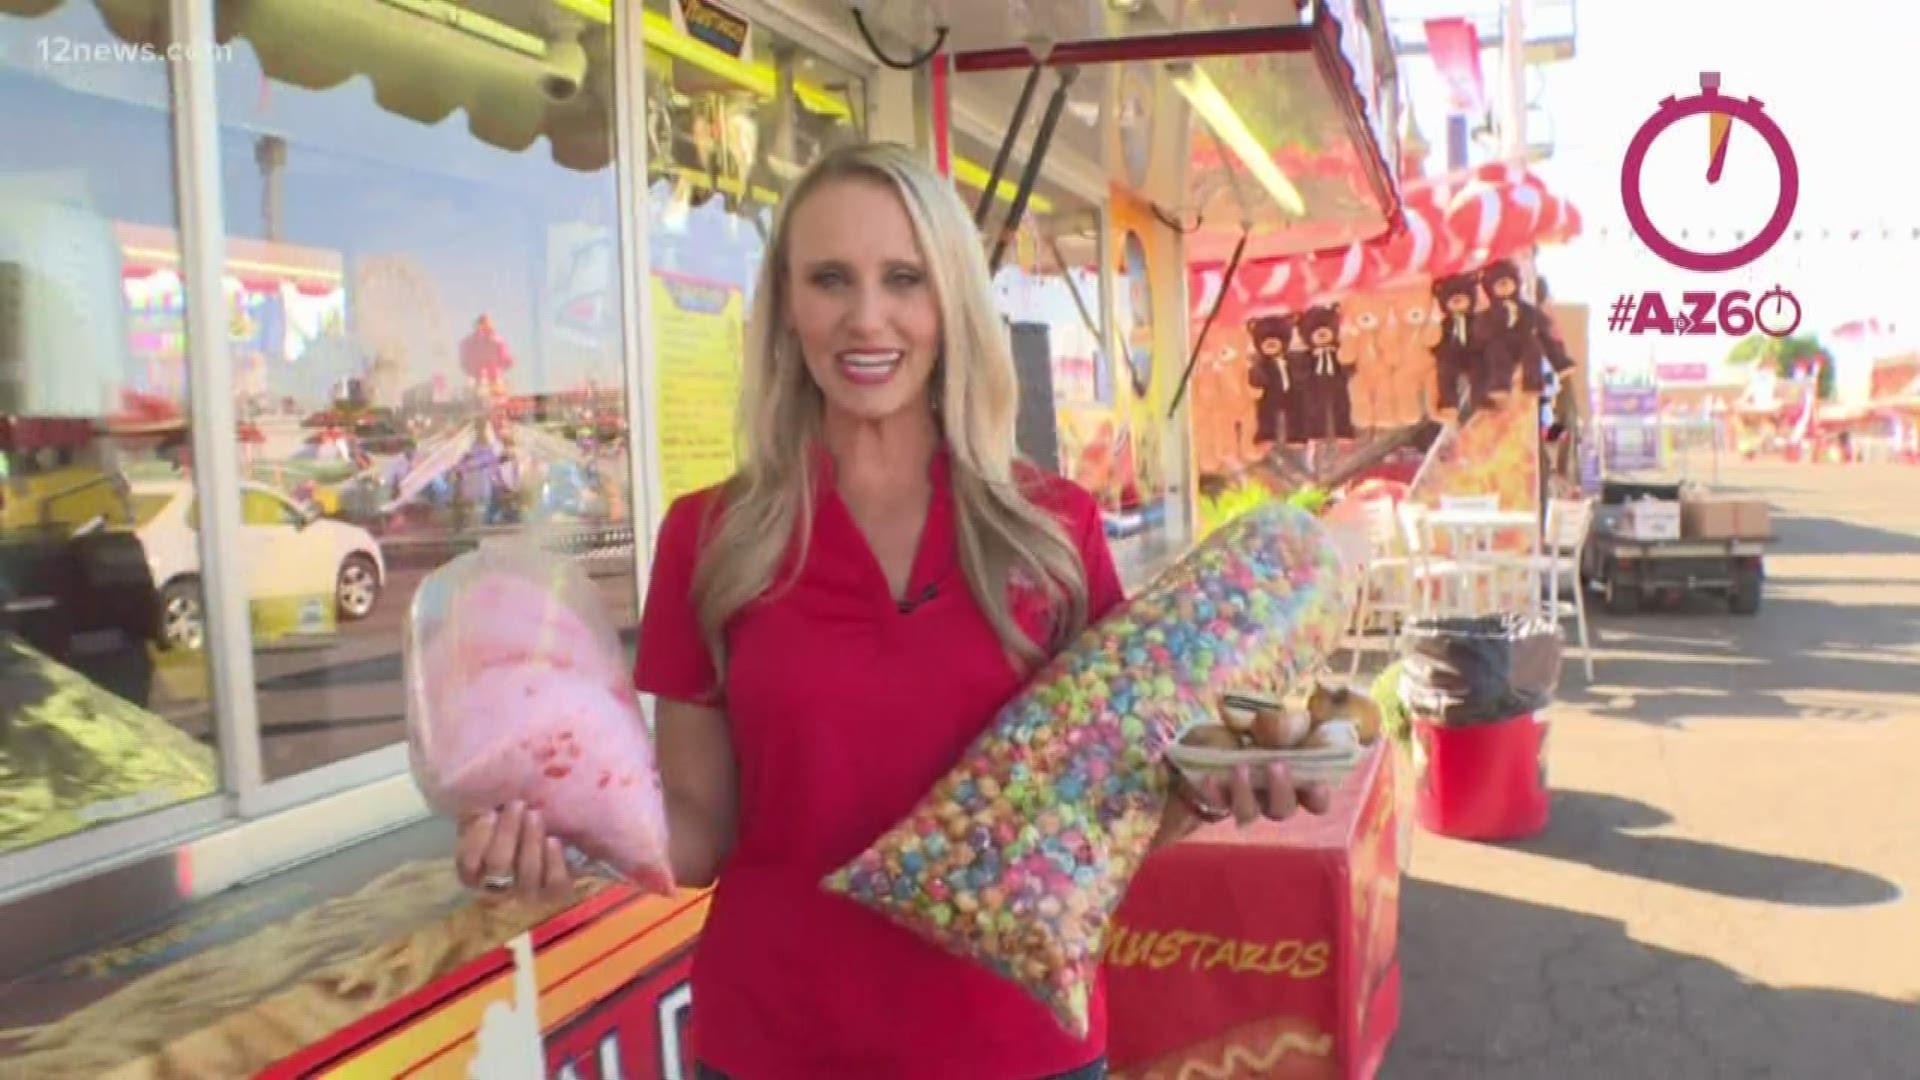 The food is always a highlight when visiting the Arizona State Fair. 12 News shows you all the fabulous food to try out at the fair!